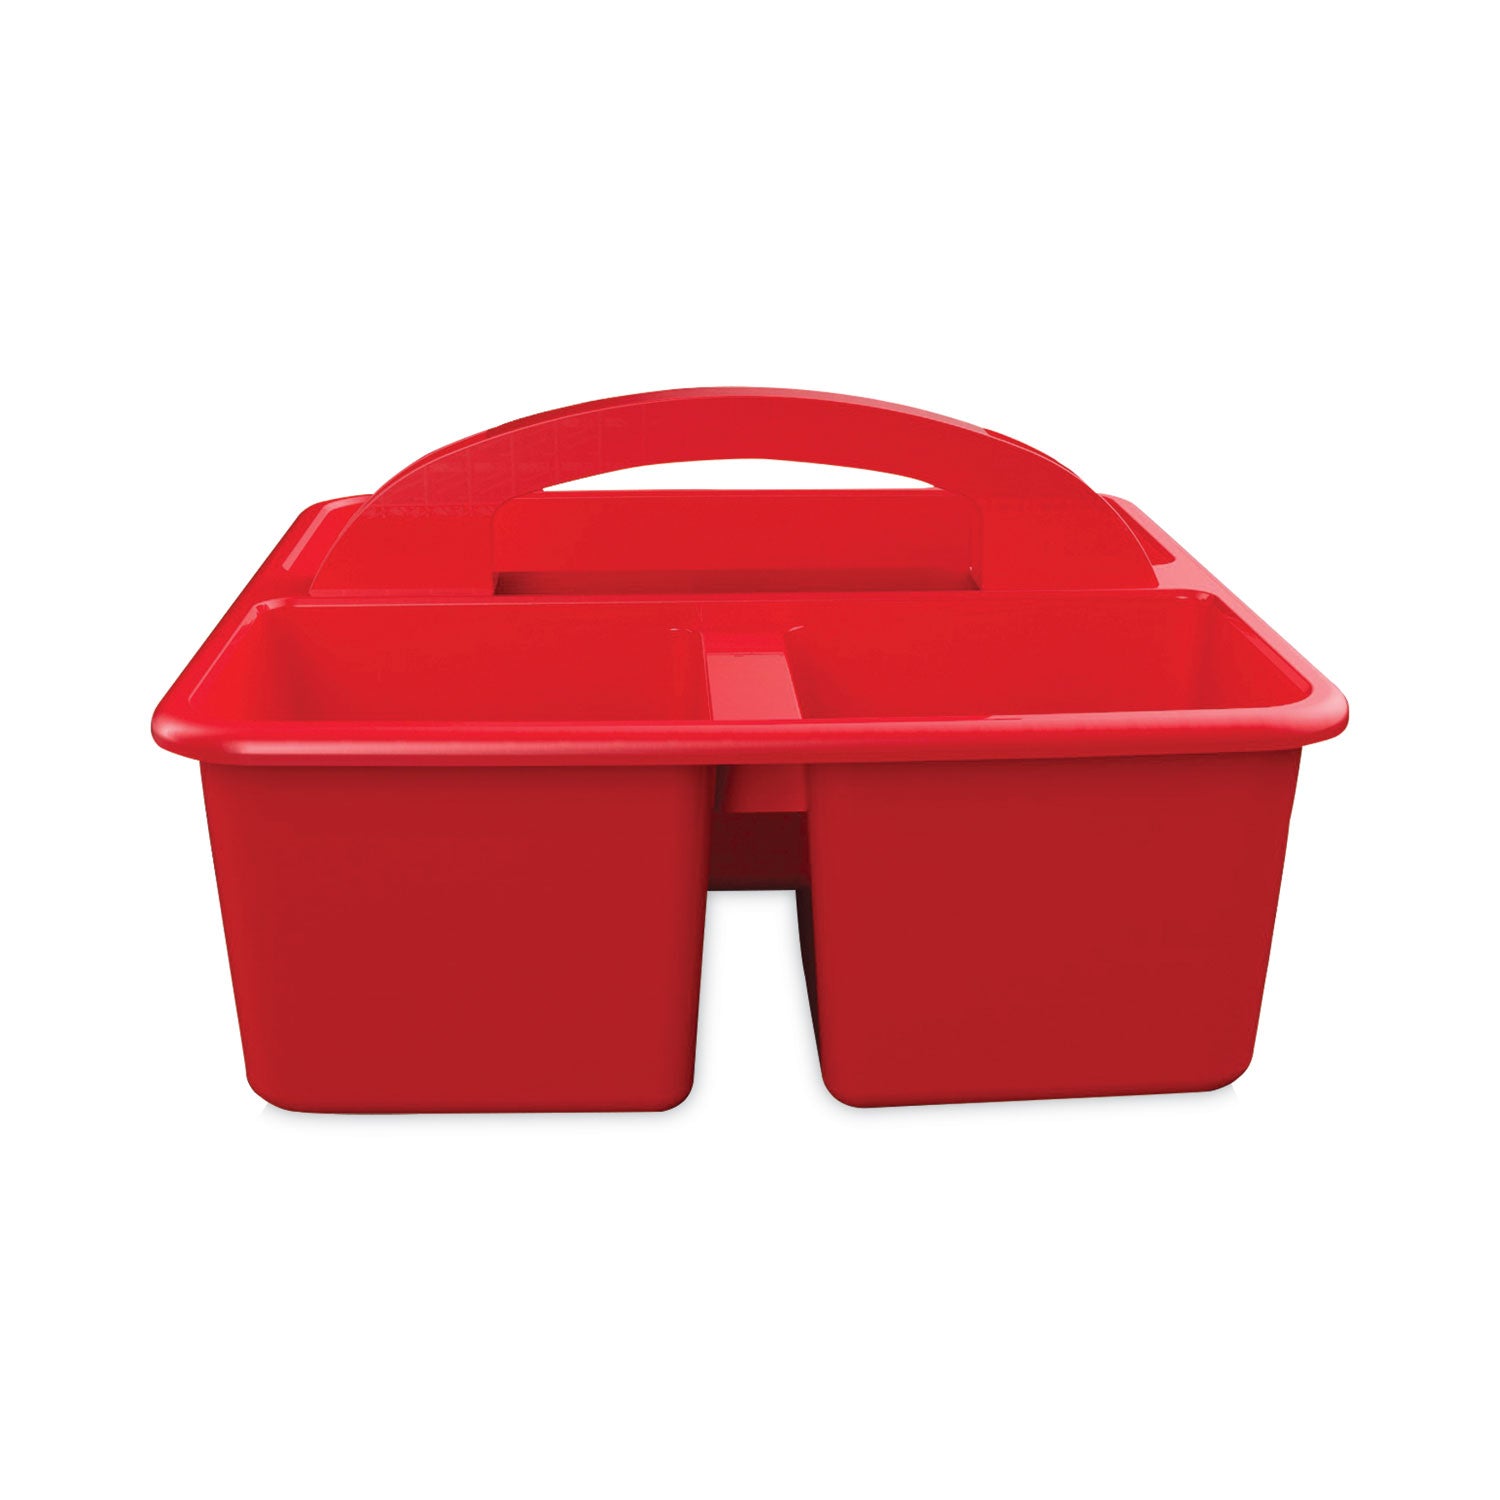 antimicrobial-creativity-storage-caddy-red_def39505red - 1